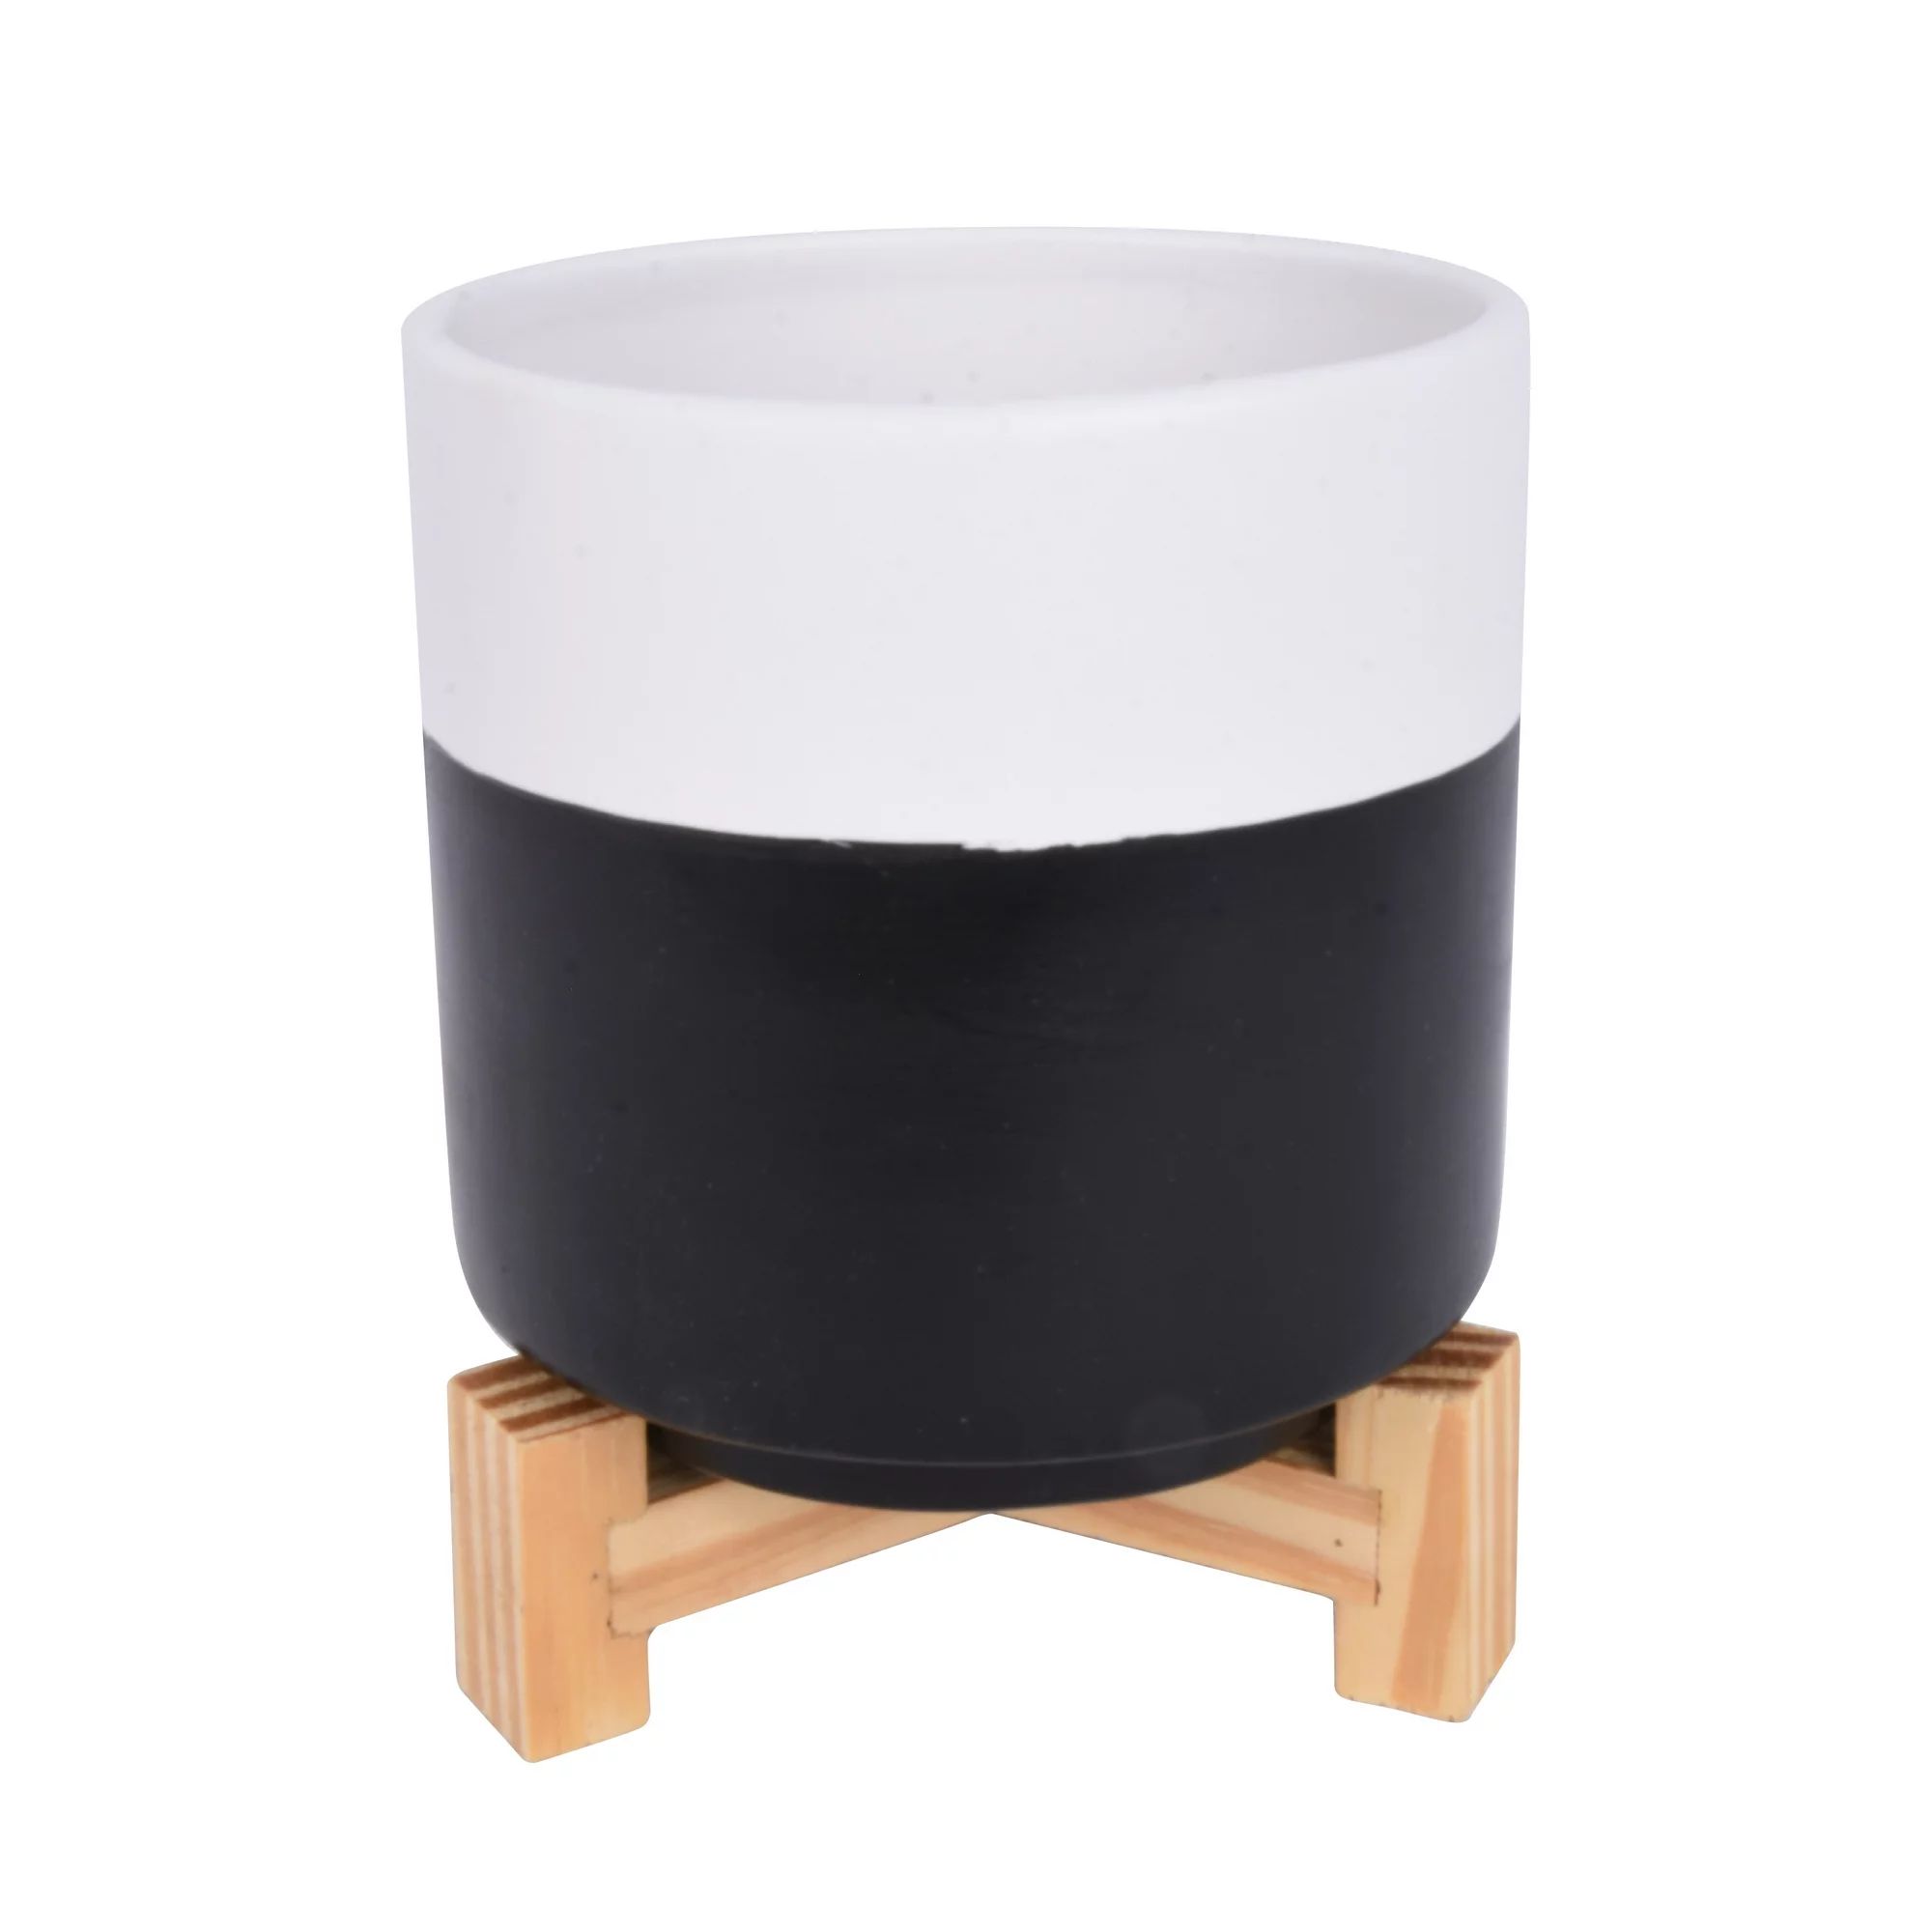 Mainstays Ceramic Black and White Ceramic Planter with Wood Stand, Set of 2 | Walmart (US)